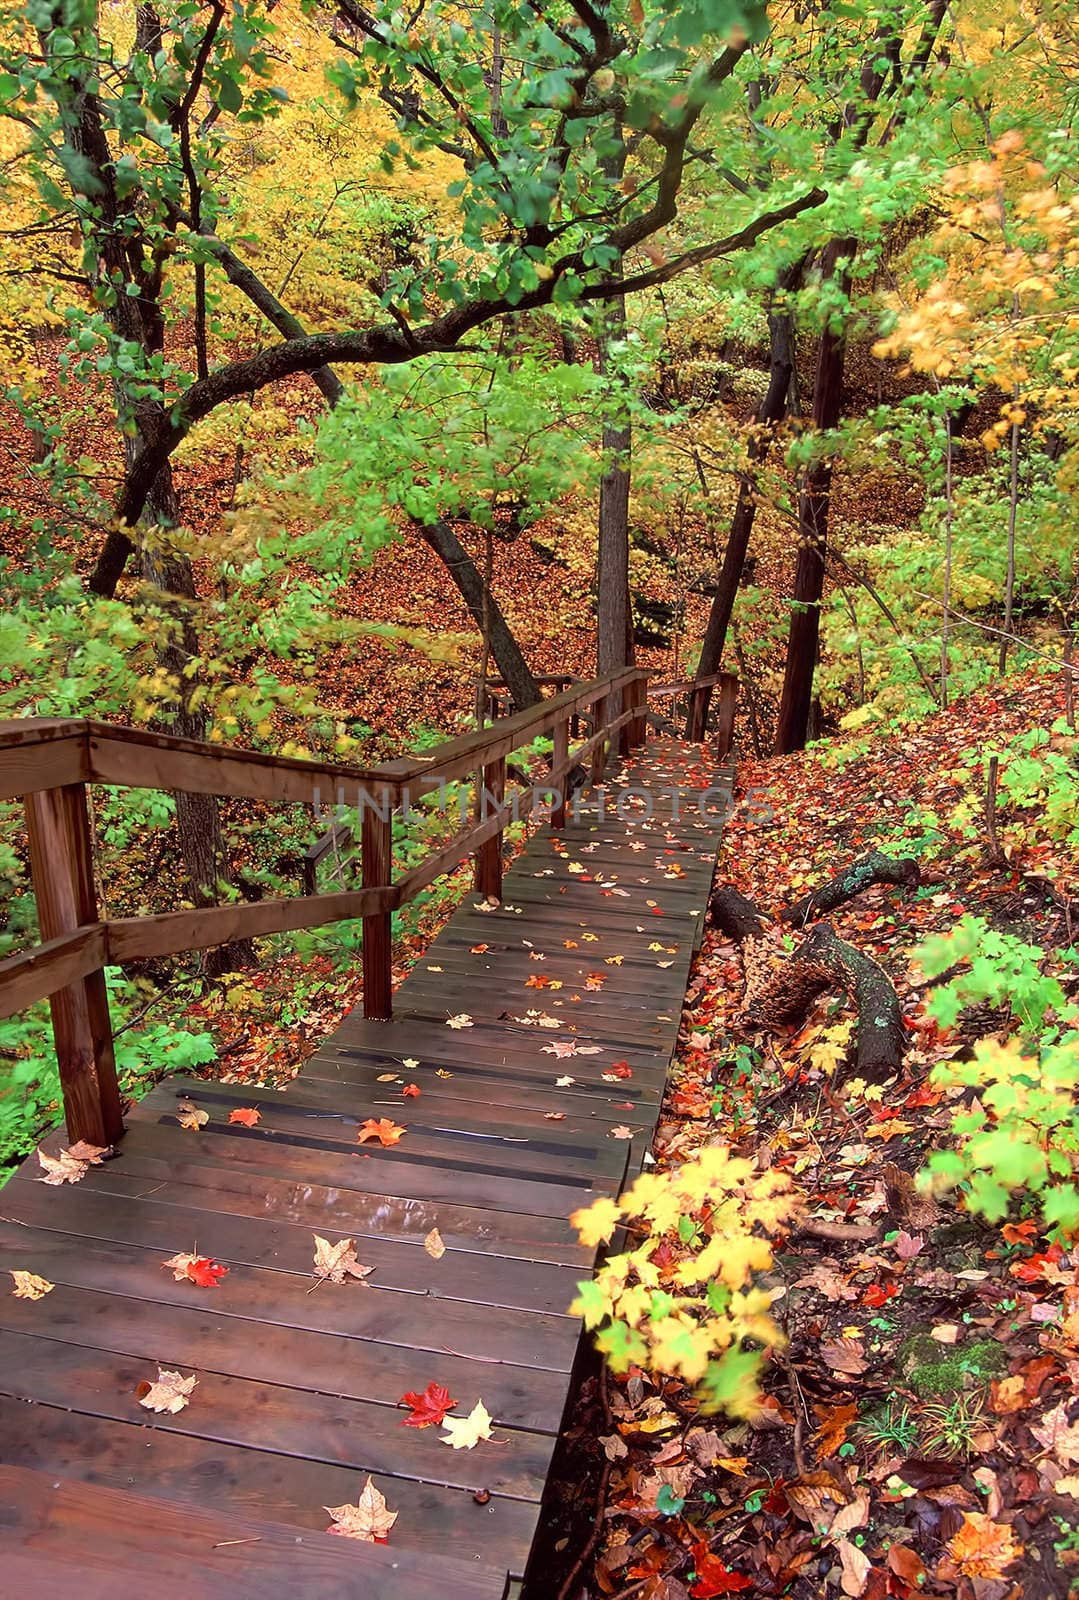 Staircase winds through a myriad of fall colors at Kishaukee Gorge Forest Preserve in northern Illinois.